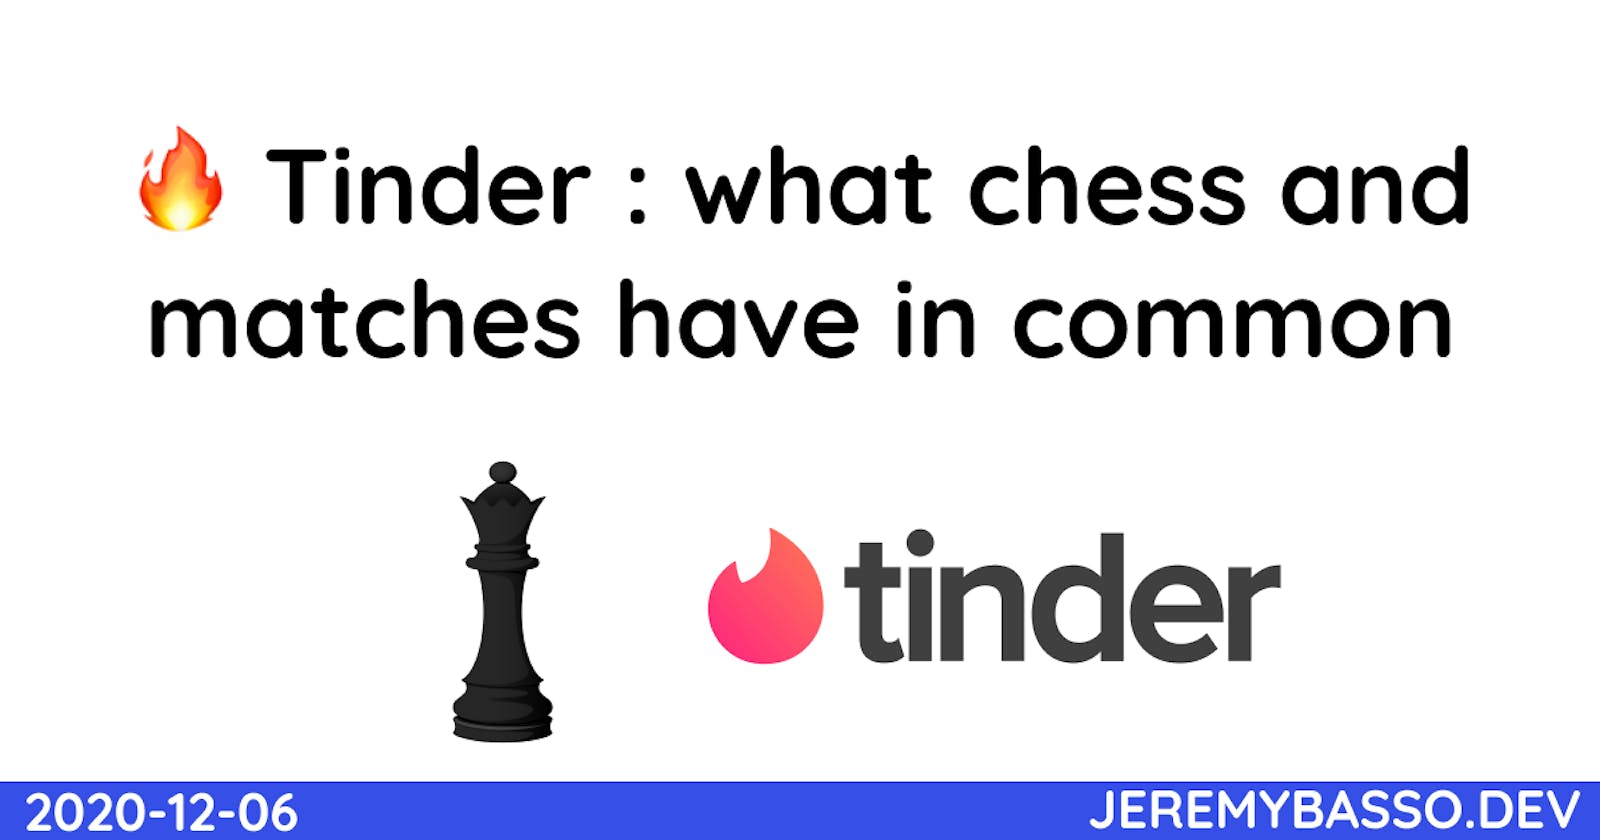 🔥 Tinder : what chess and matches have in common